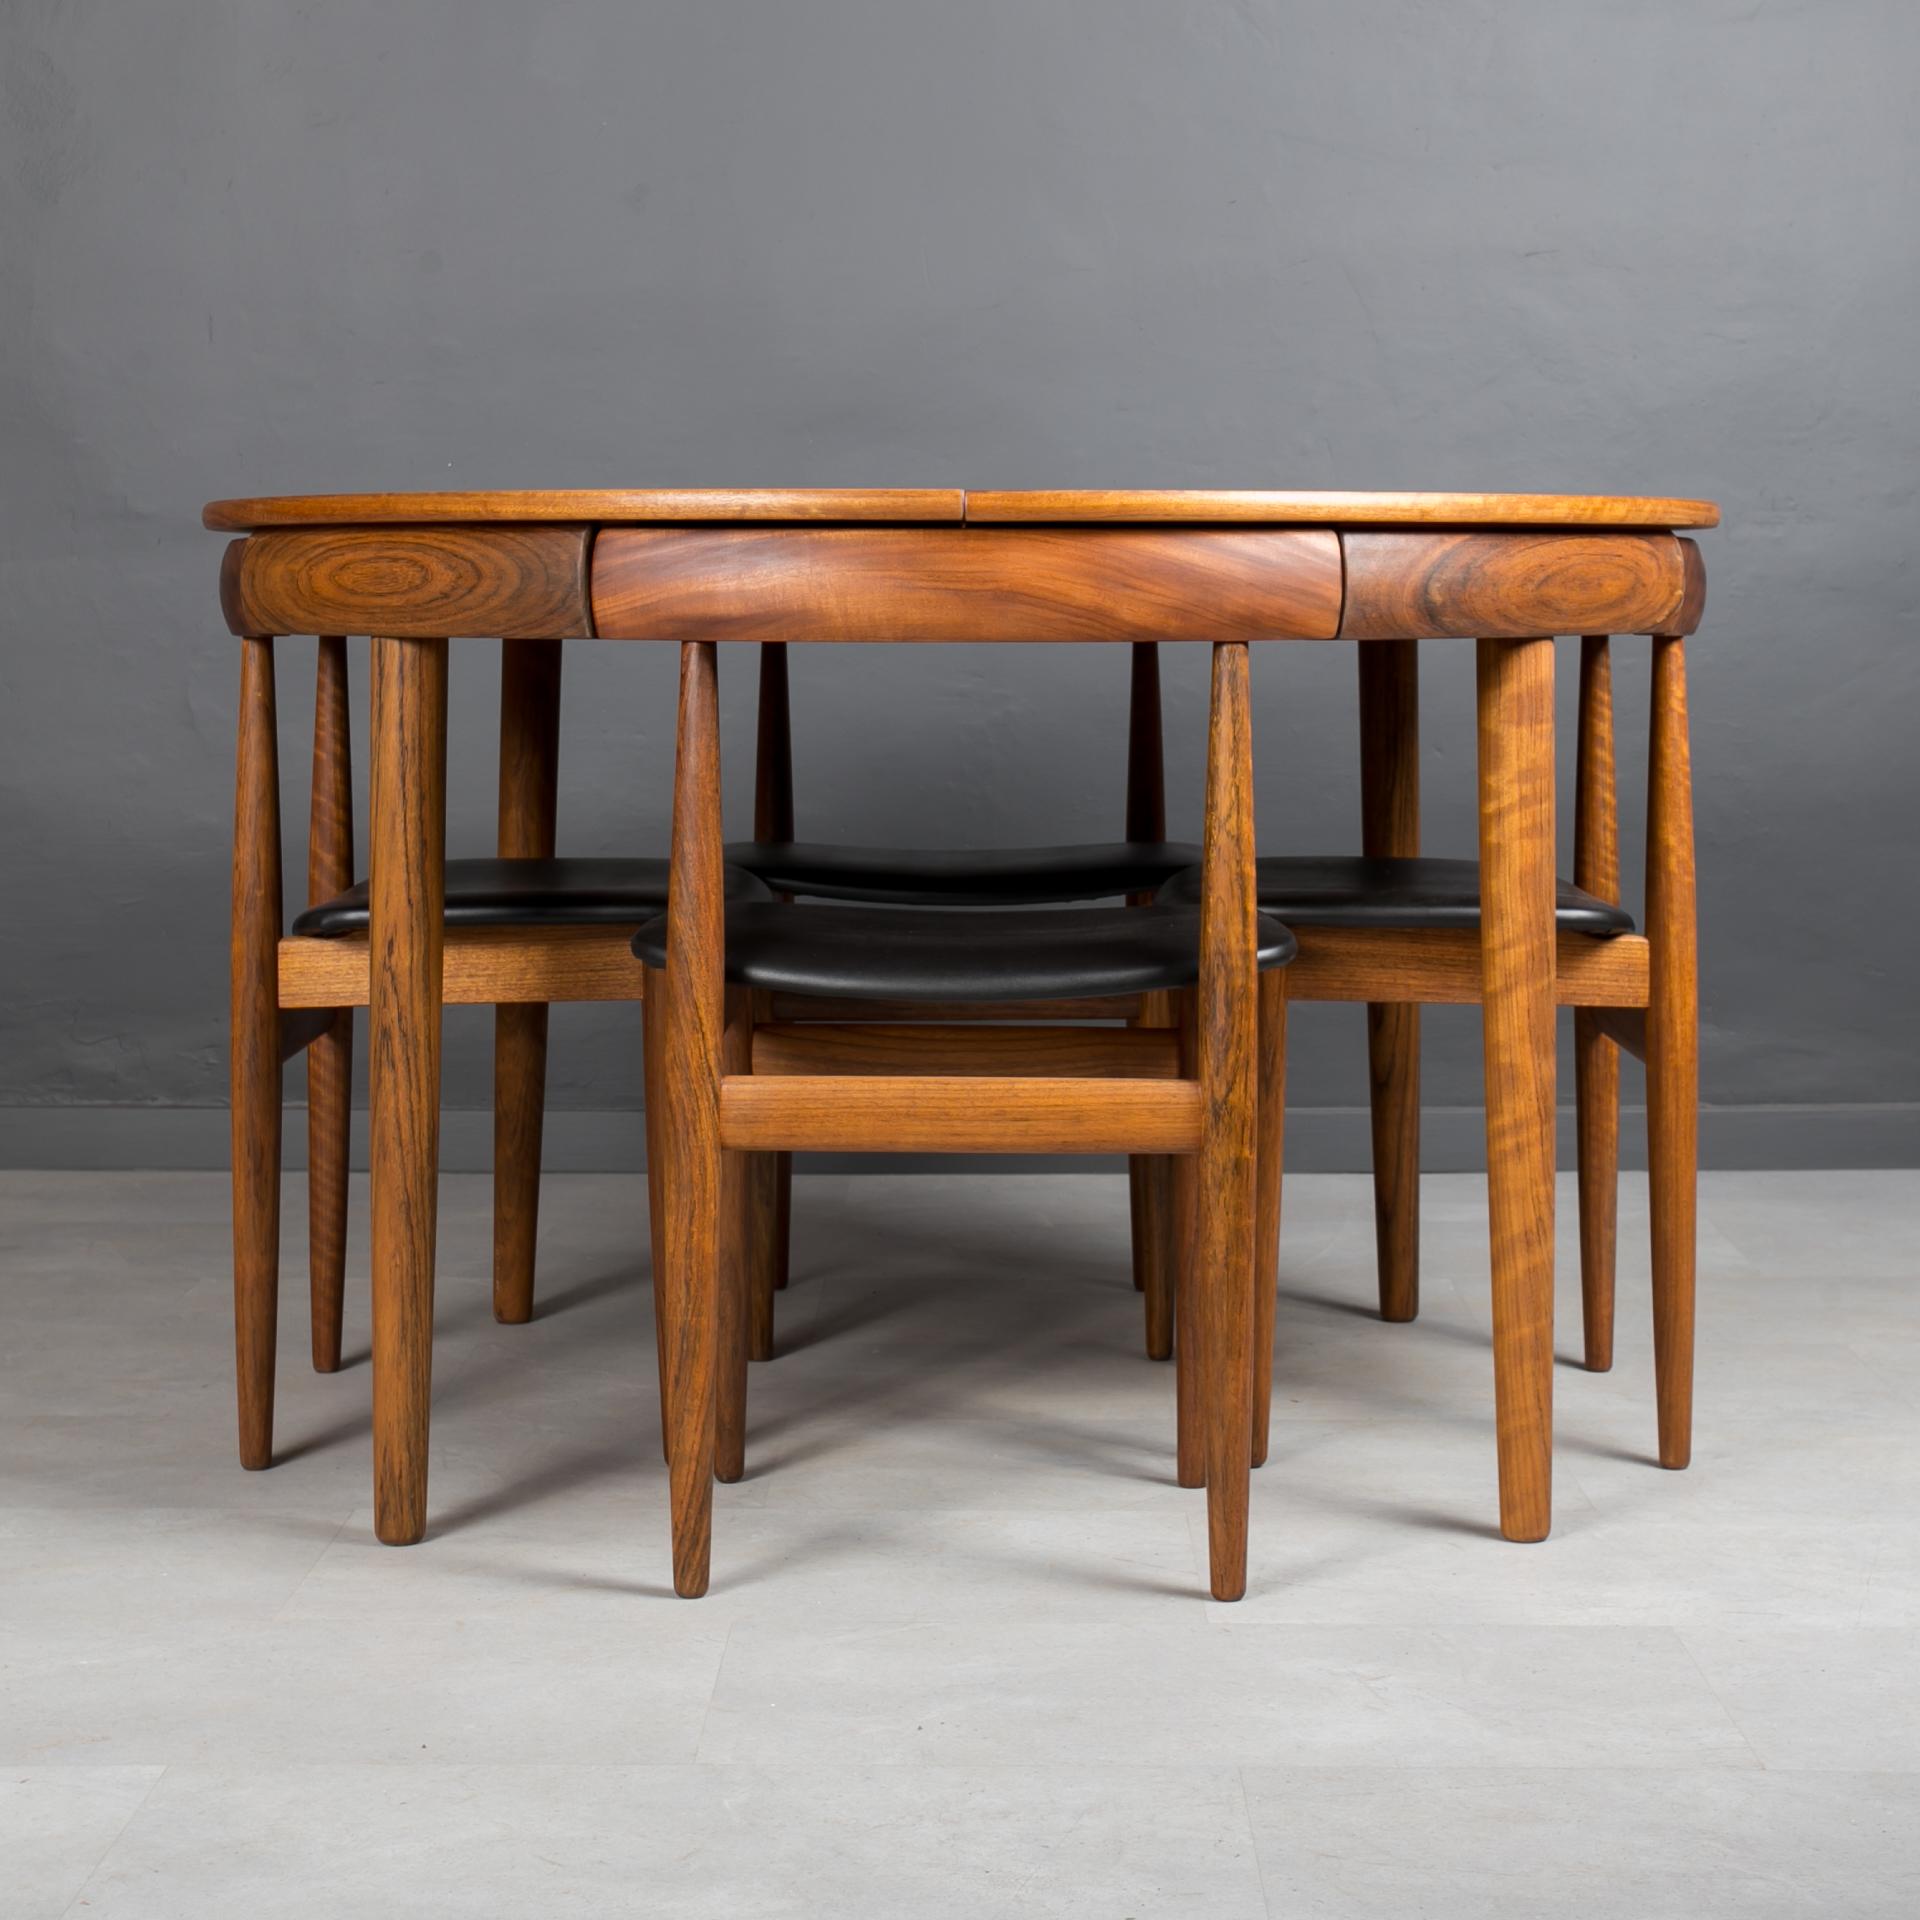 Rare “Roundette” dining set designed by Hans Olsen in 1960s. Produced in Denmark. This gorgeous dining set features an extendable teak wood round table and four dining chairs. The dining chairs seamlessly tuck into the table with their curved back